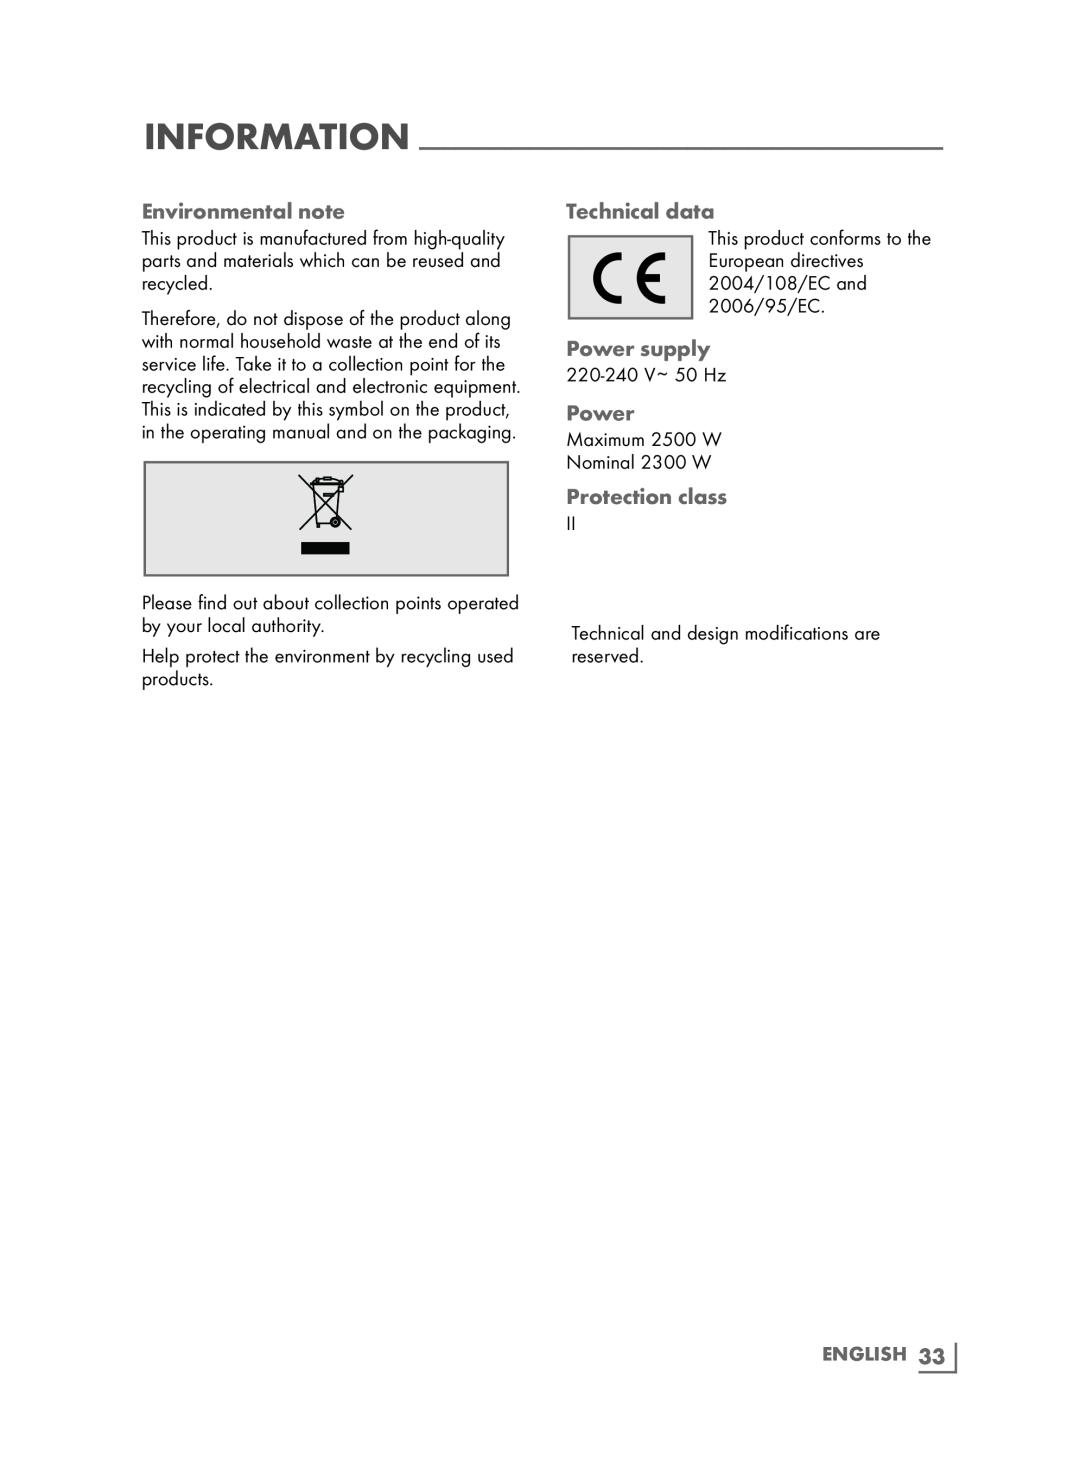 Grundig VCC9850 manual Environmental note, Technical data, Power supply, Protection class, English 